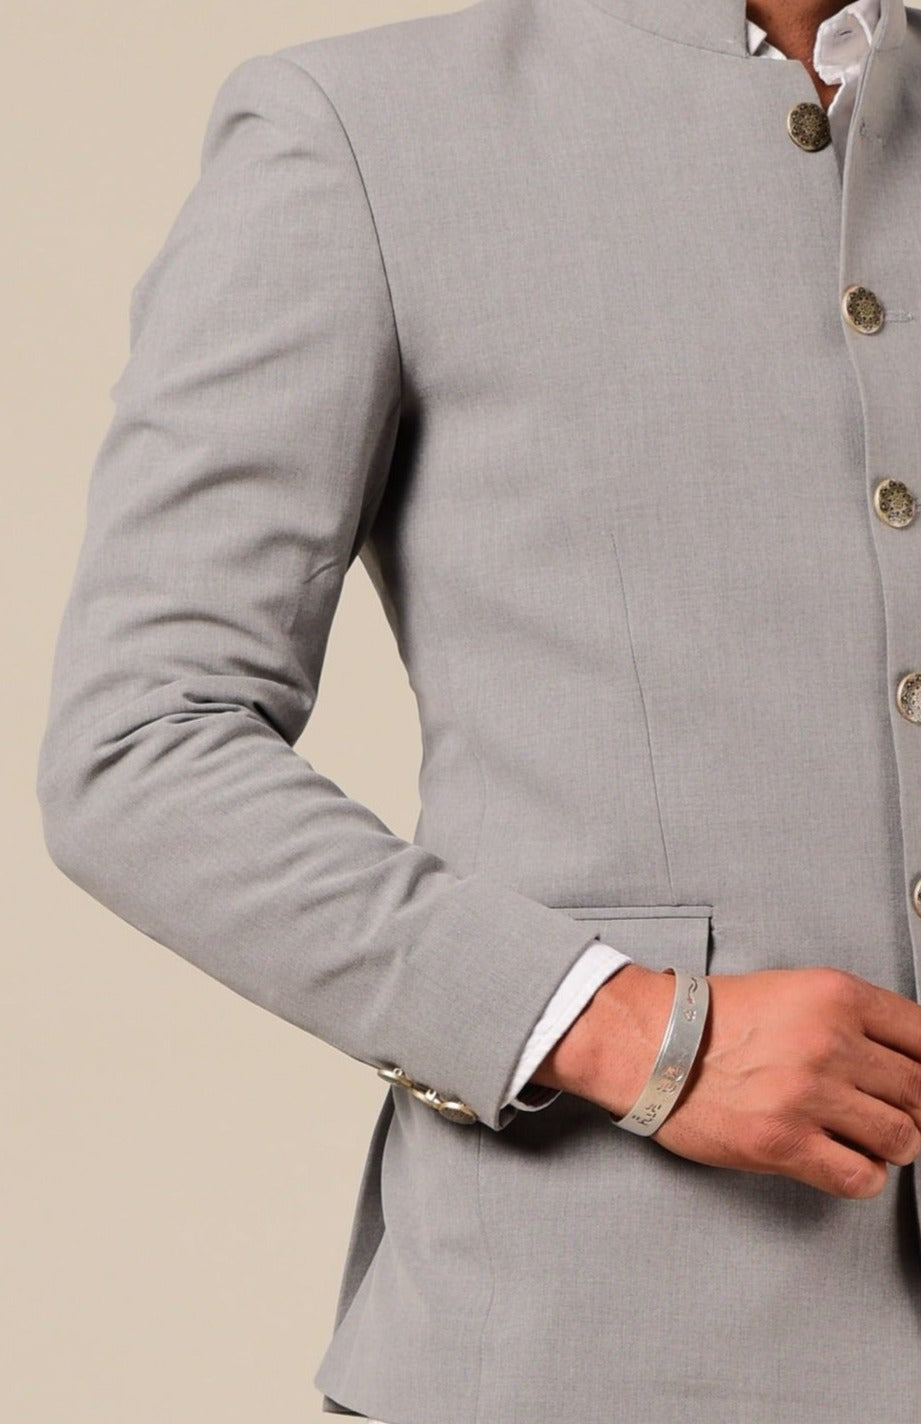 Light Grey Color Bandhgala With White Trouser